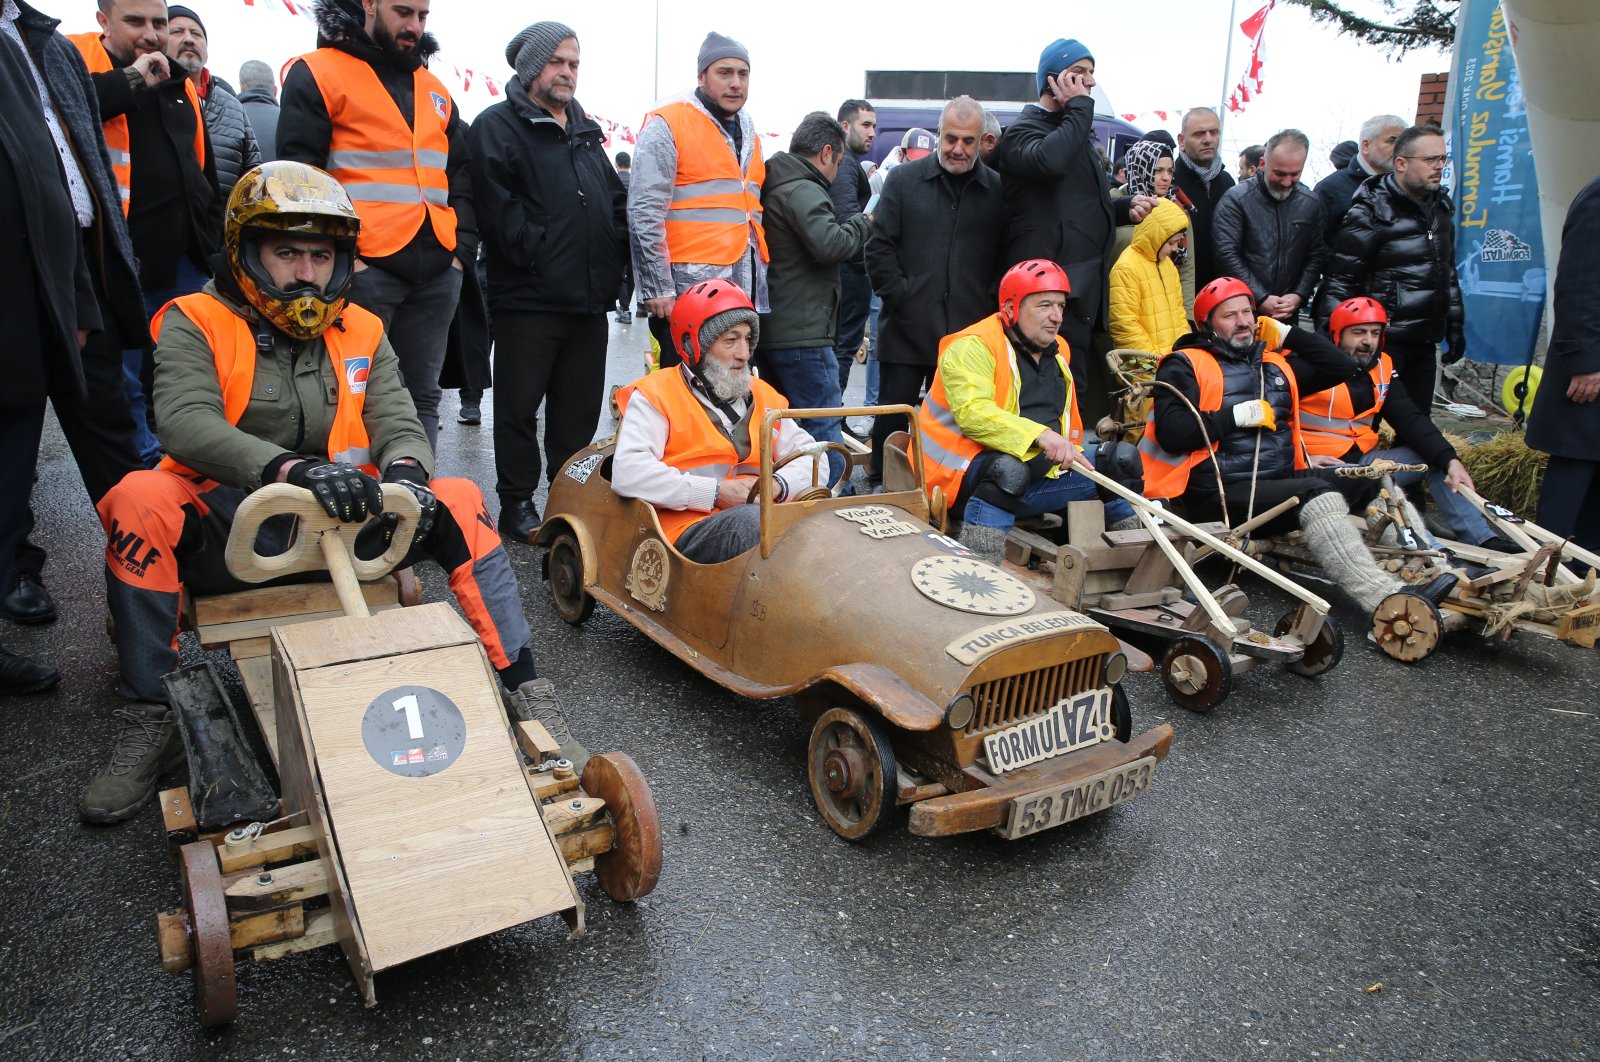 Wooden car racers wait at the Formulaz race starting point in front of the Alemdağ Culture Center, Istanbul, Türkiye, Jan. 29, 2023. (AA Photo)